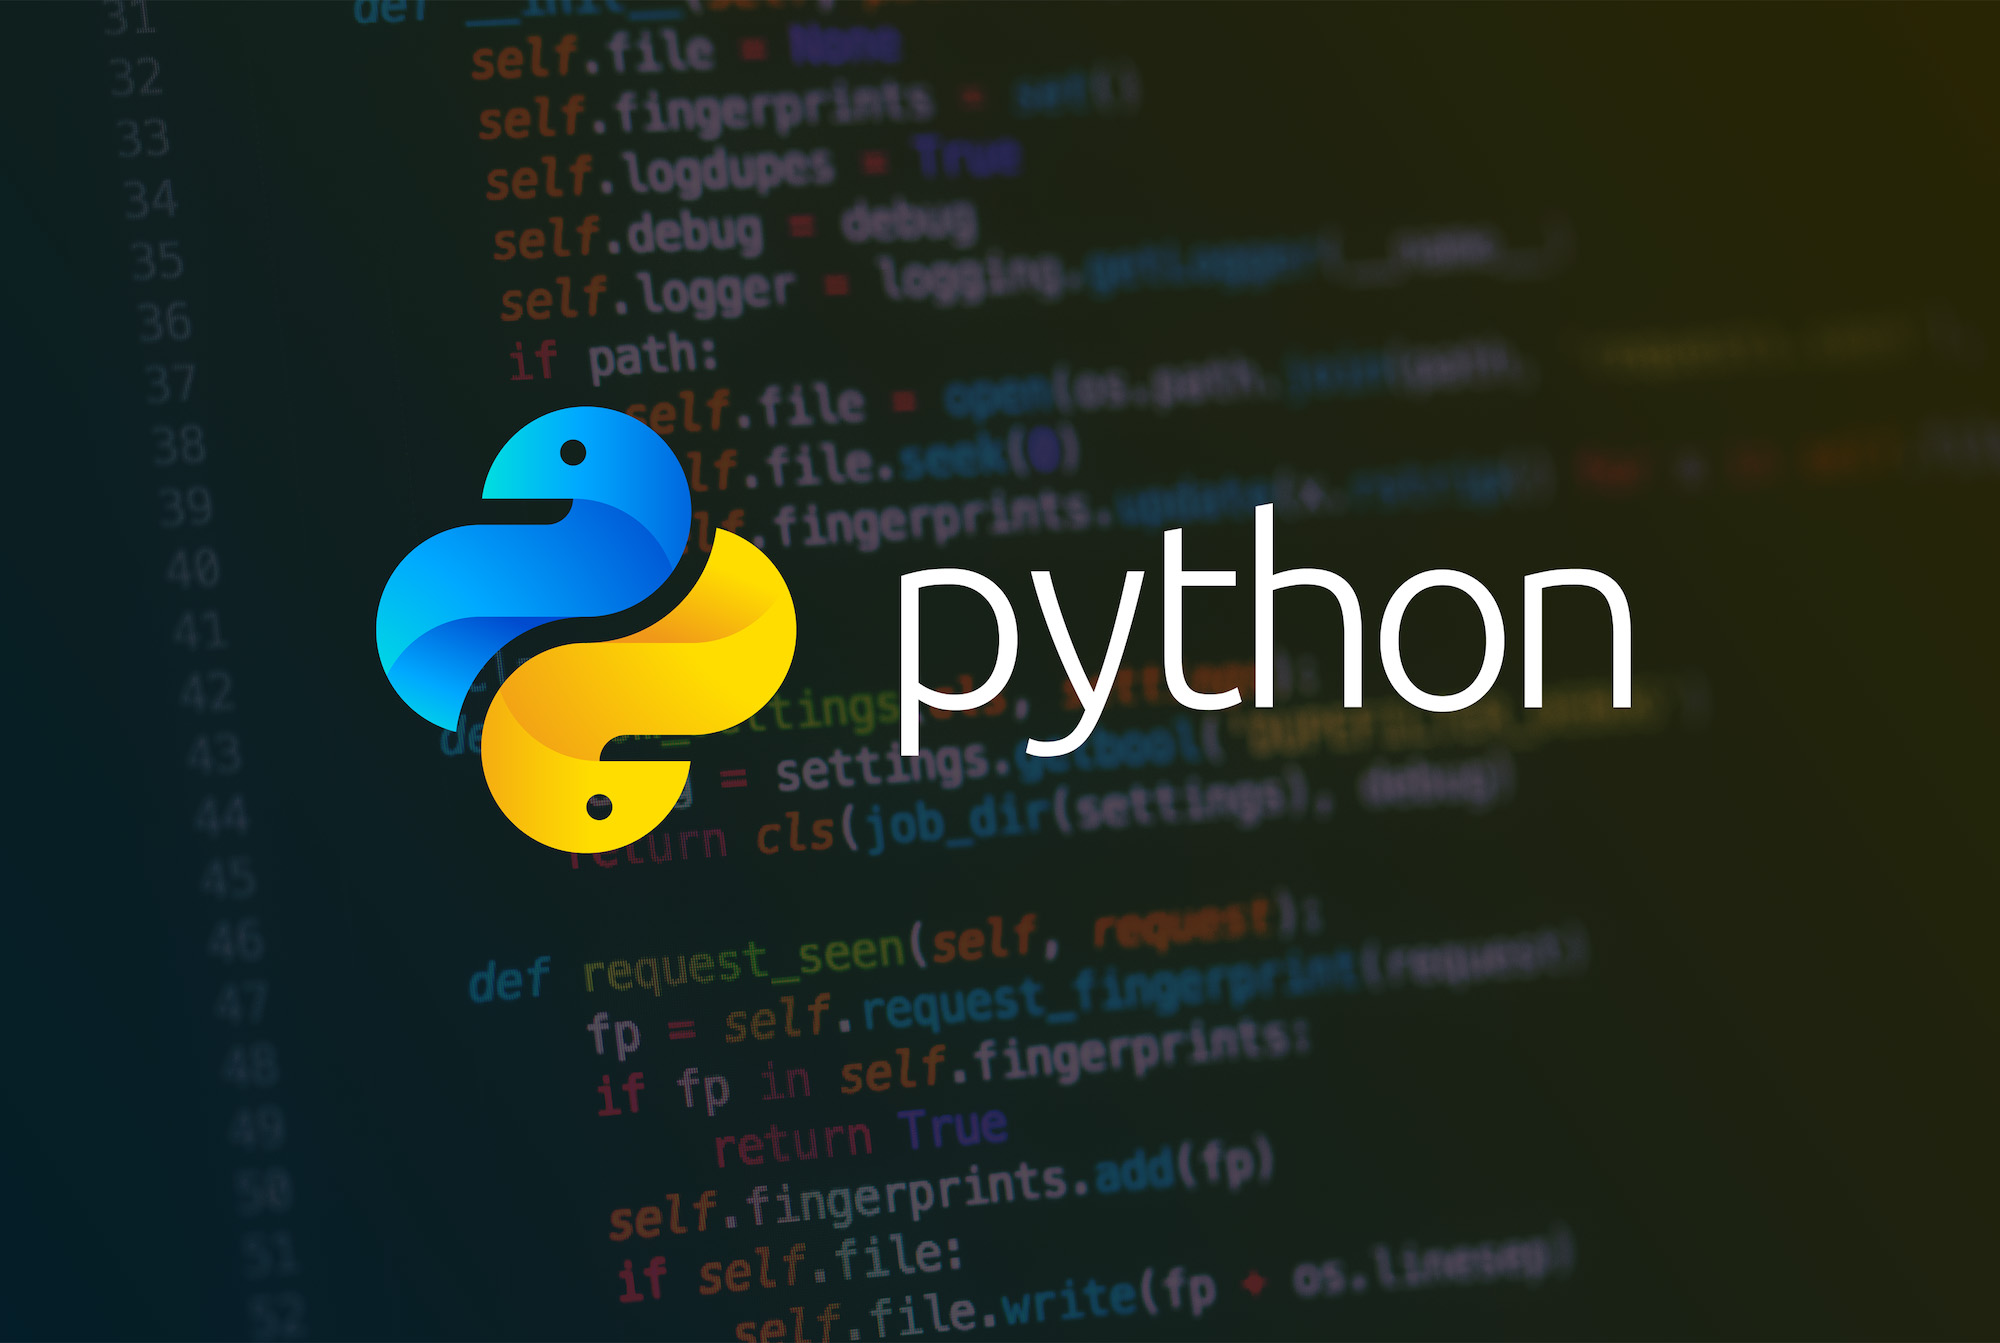 Python: how to check the status of a URL